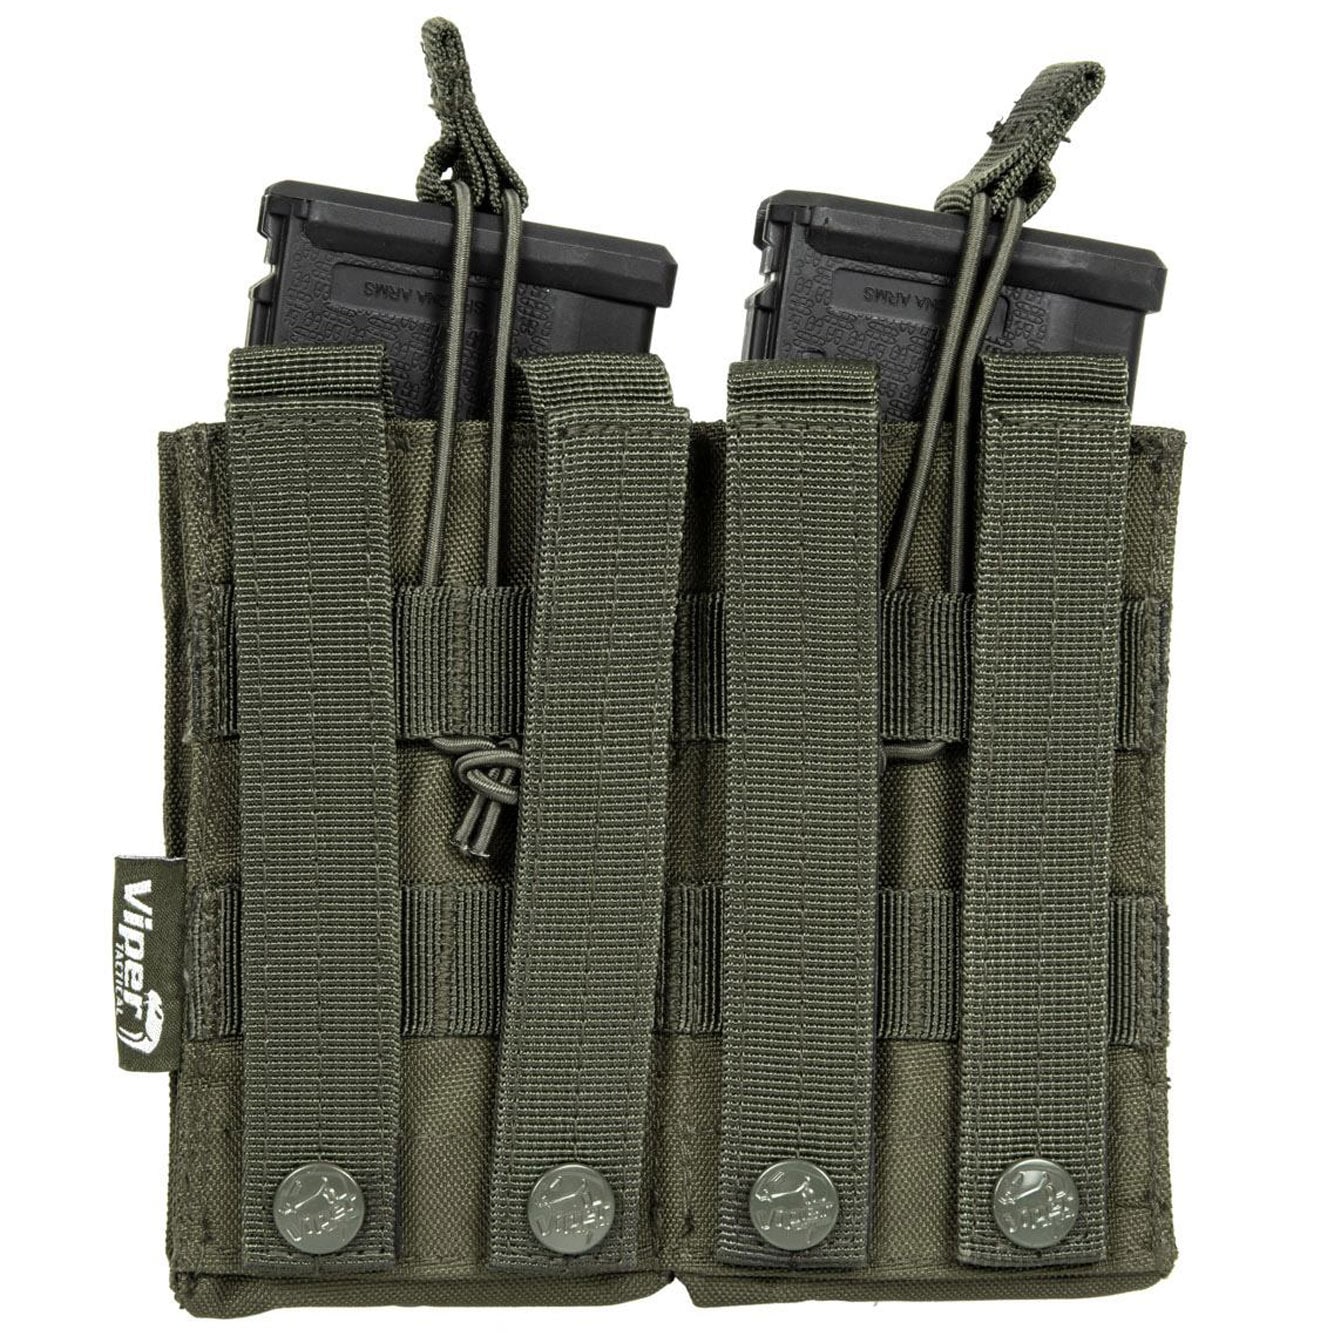 Ładownica Viper Tactical Quick Release na 2 magazynki do M4/M16 - Olive 